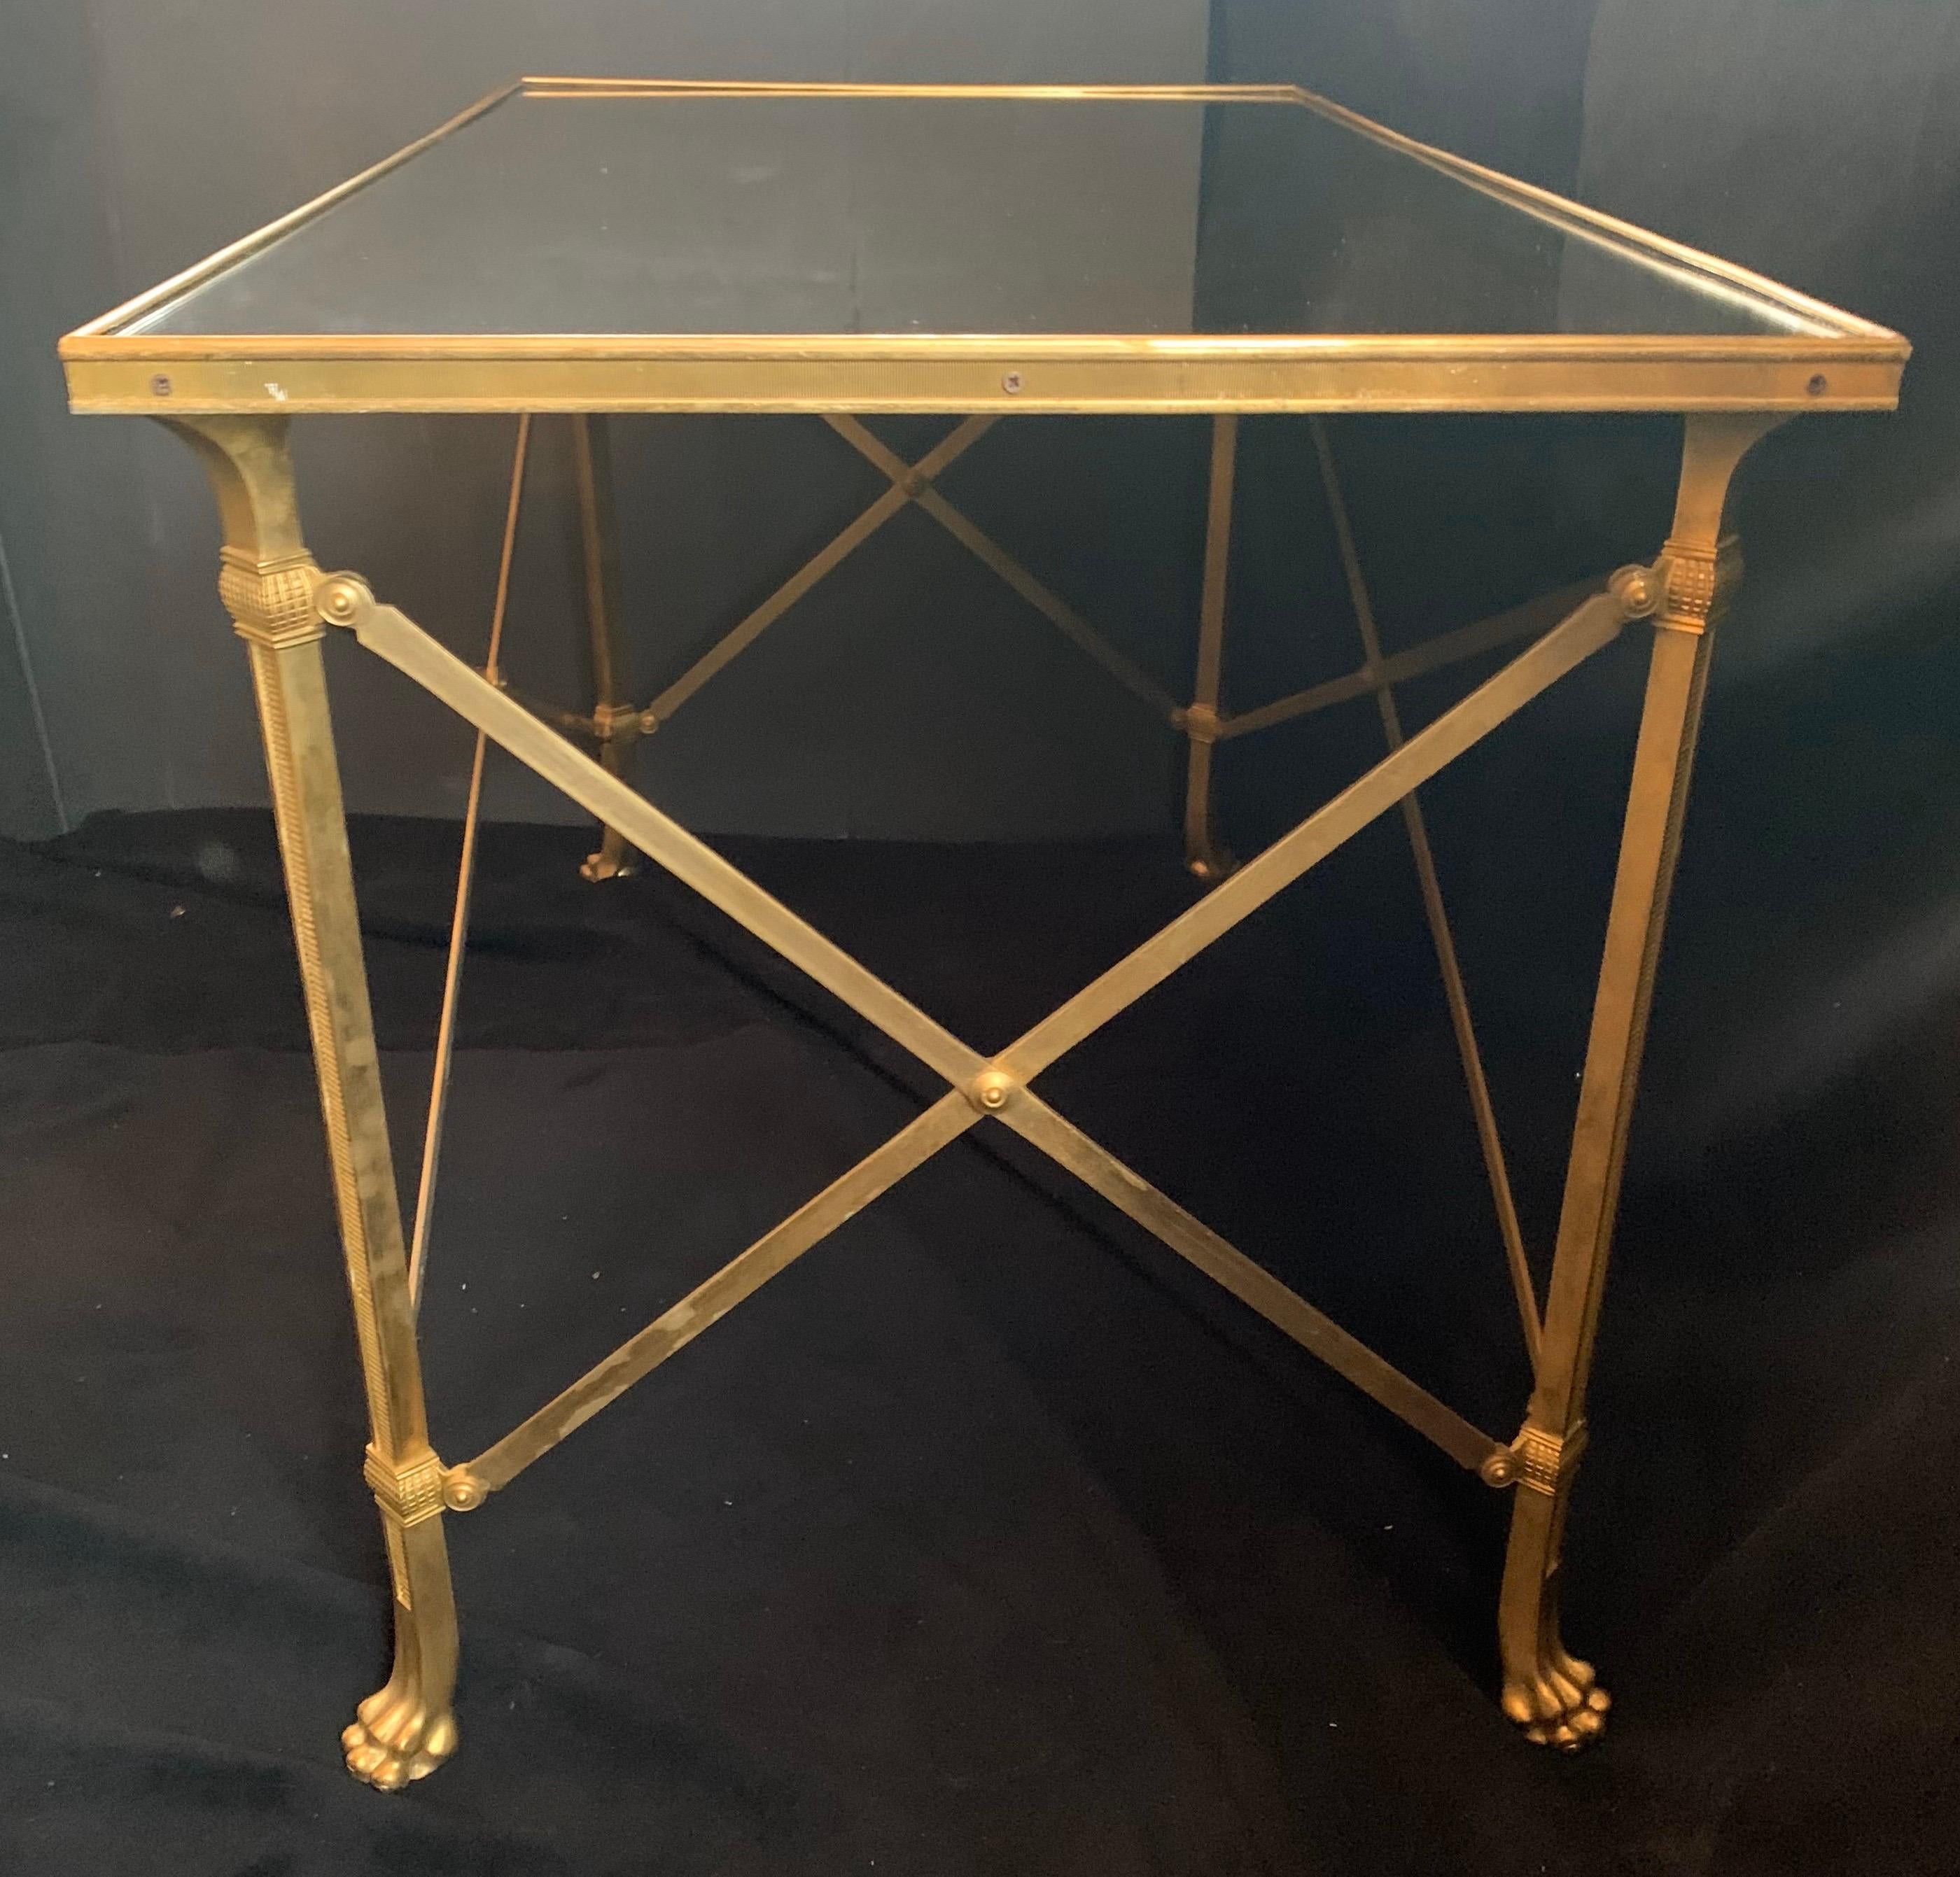 A wonderful Regency style French ormolu bronze and antiqued distressed mirrored top gueridon side / coffee table with paw feet retailed by The Lorin Marsh Showroom in the D & D Building NYC.